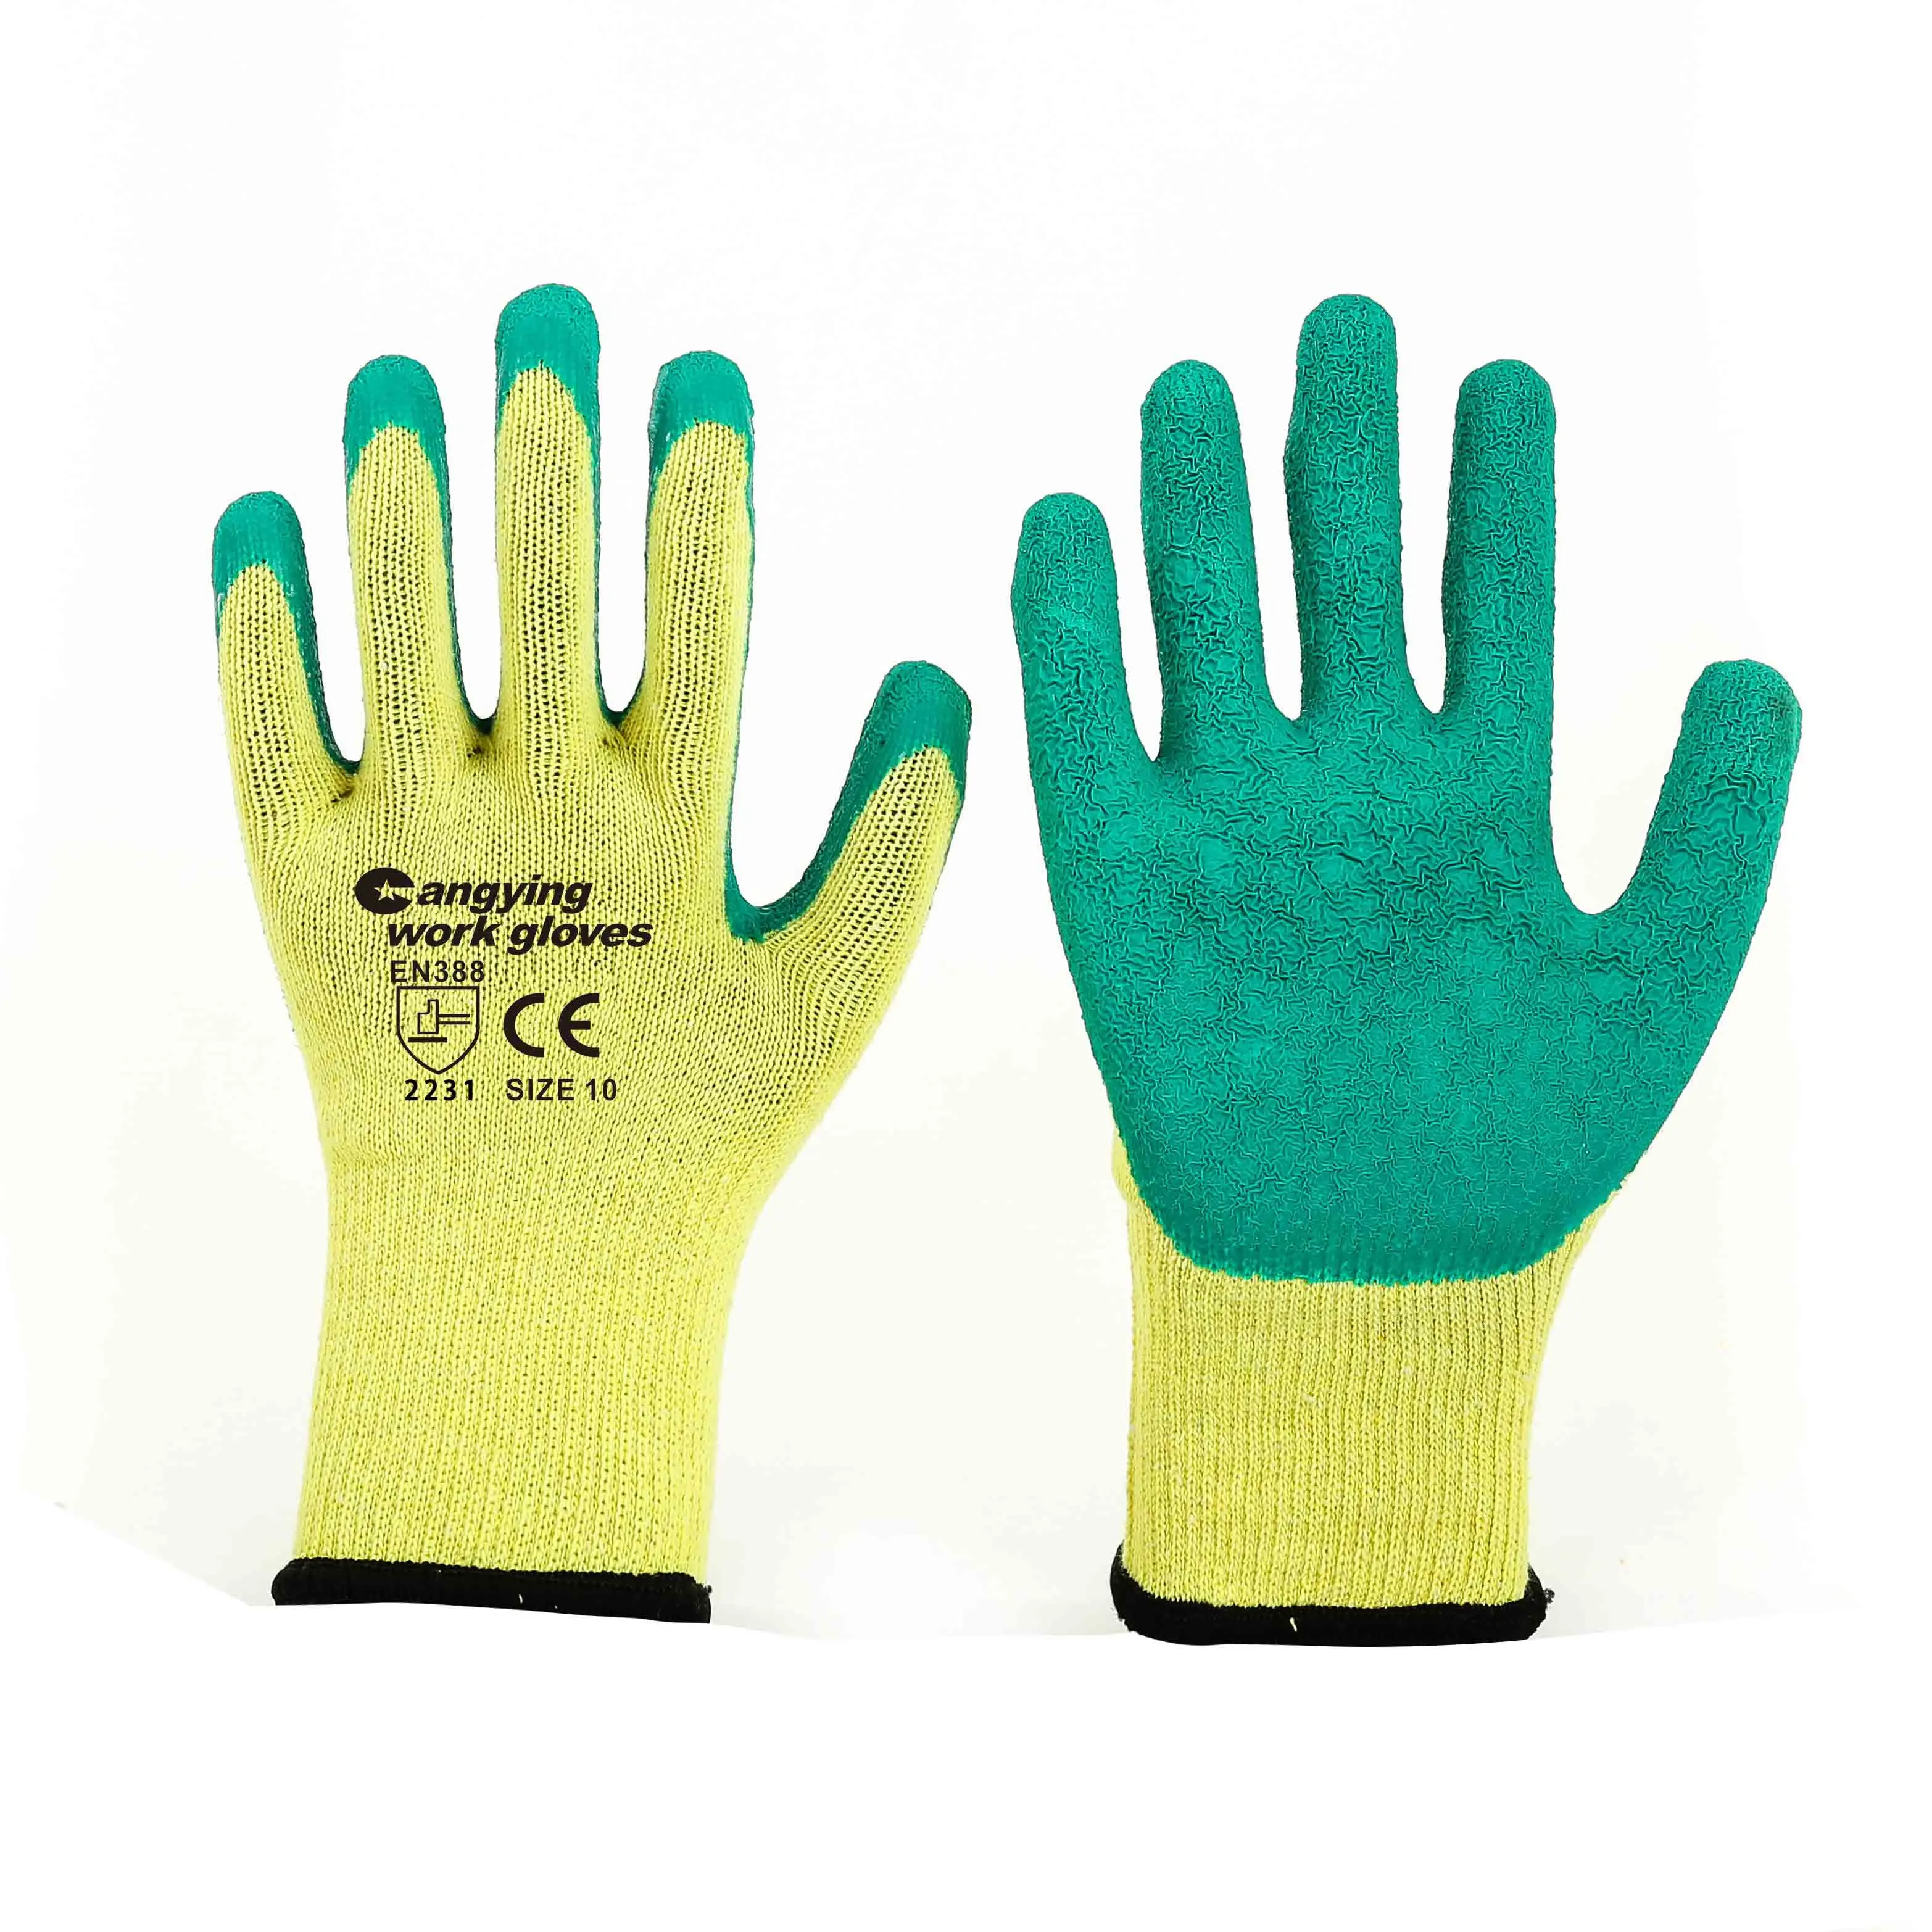 cotton shell with latex coating workwear gloves industrial working safety gloves